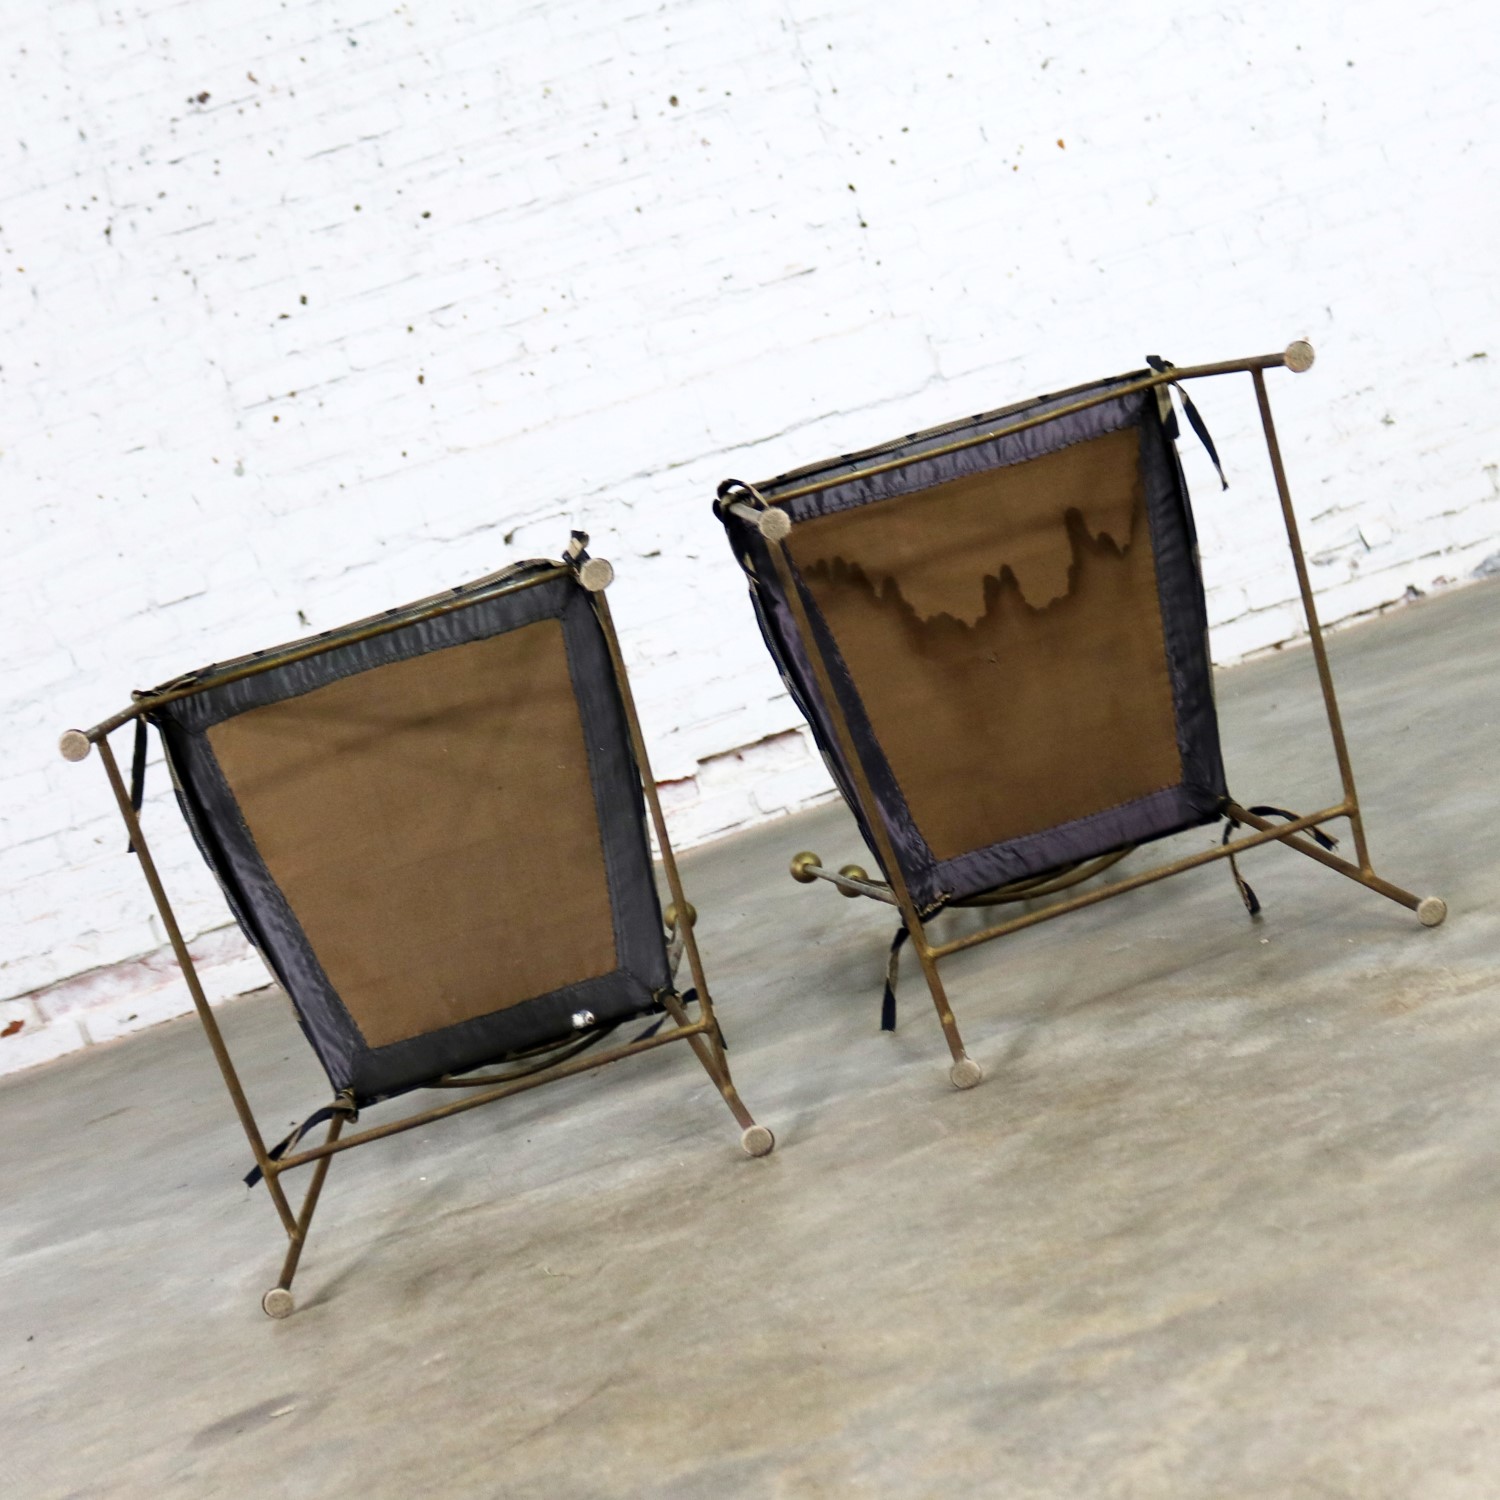 Pair Gilt Iron Chairs Crown or Harlequin Style Ball Finials Art Deco Hollywood Regency